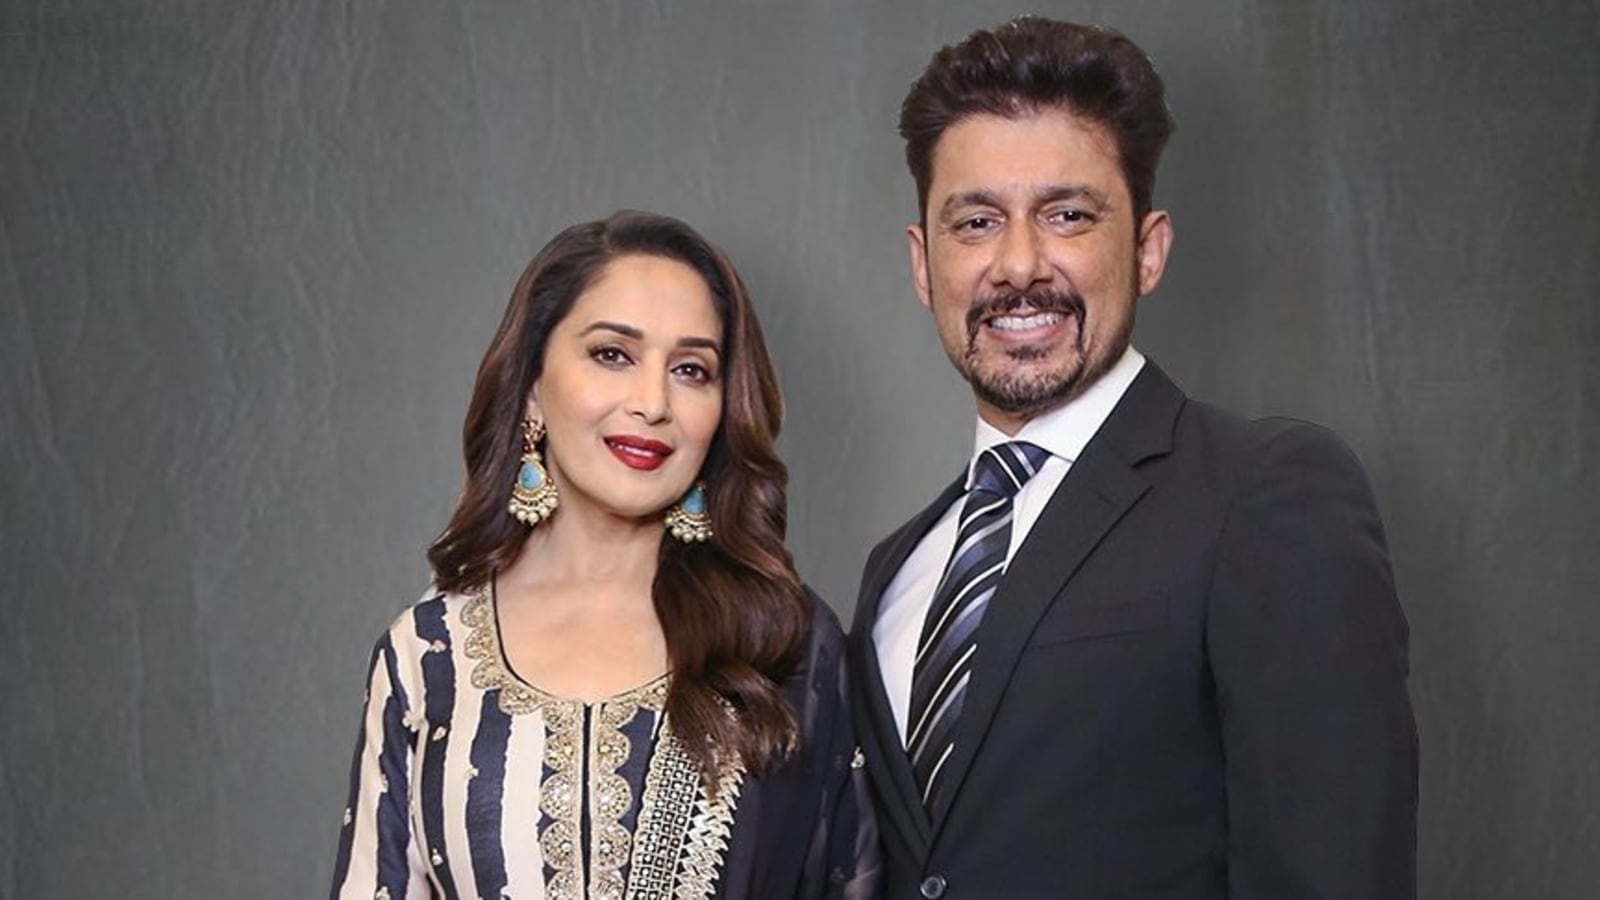 When Dr Nene Said Madhuri Dixit Being A Celeb Makes Some Things Difficult Bollywood